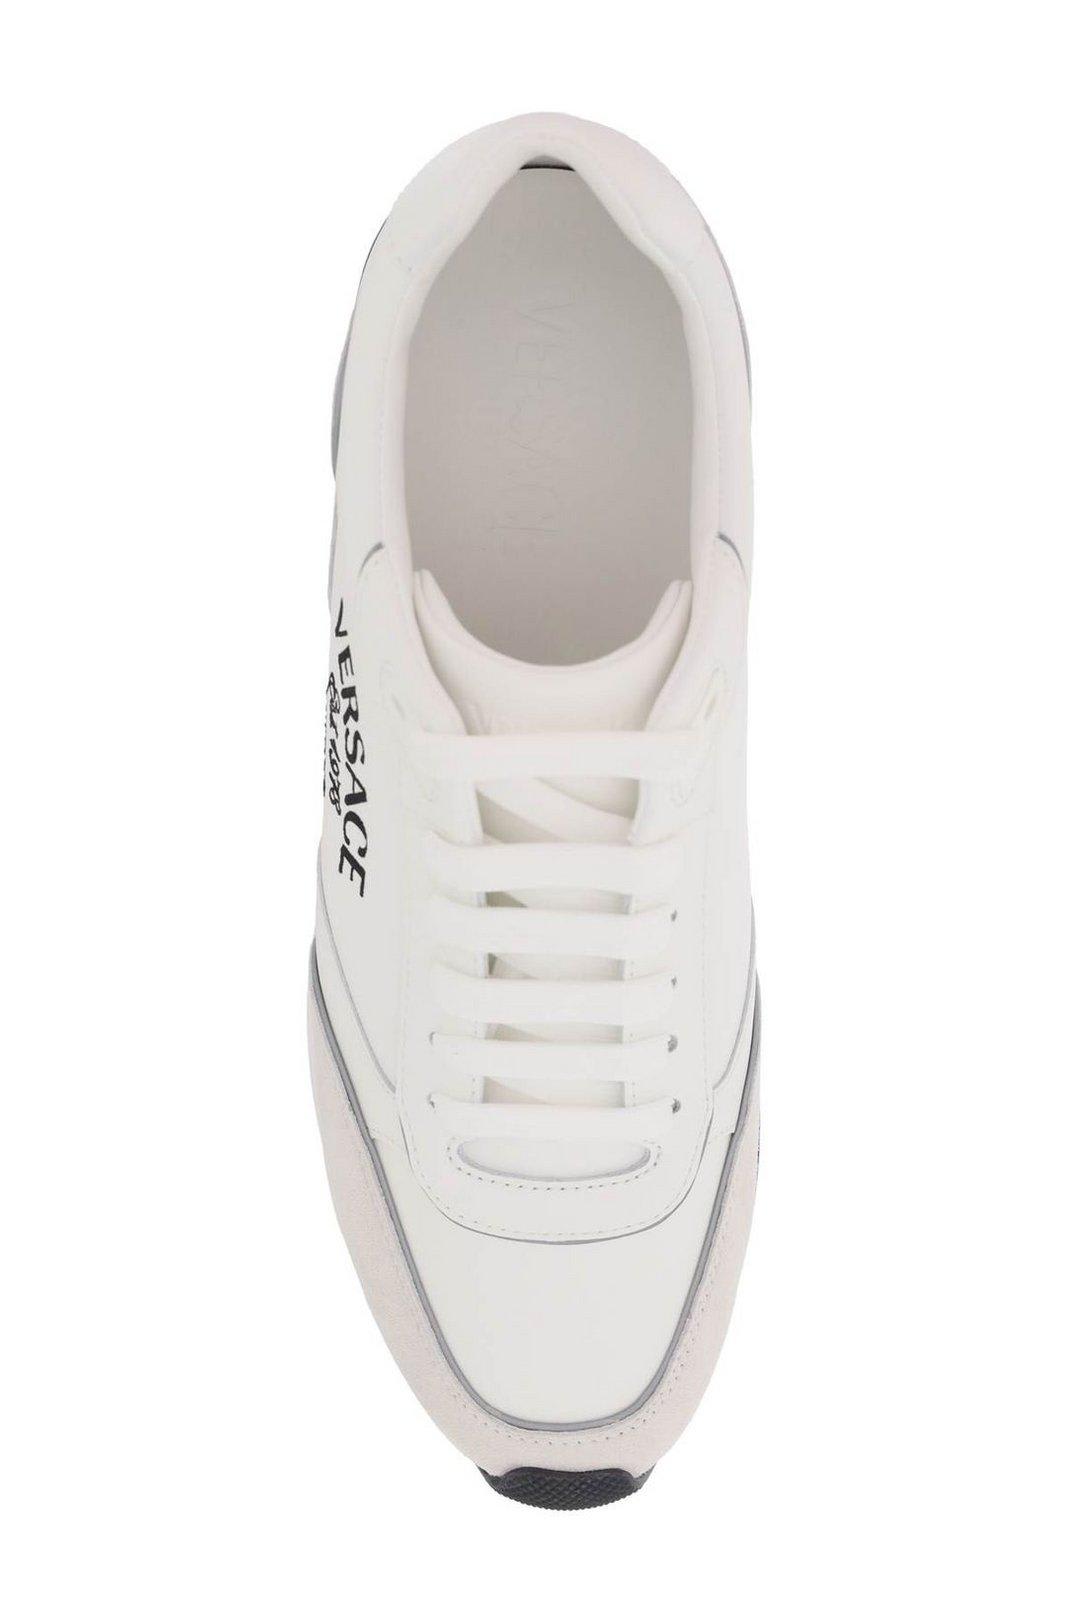 Shop Versace Milano Round-toe Lace-up Sneakers In Bianco